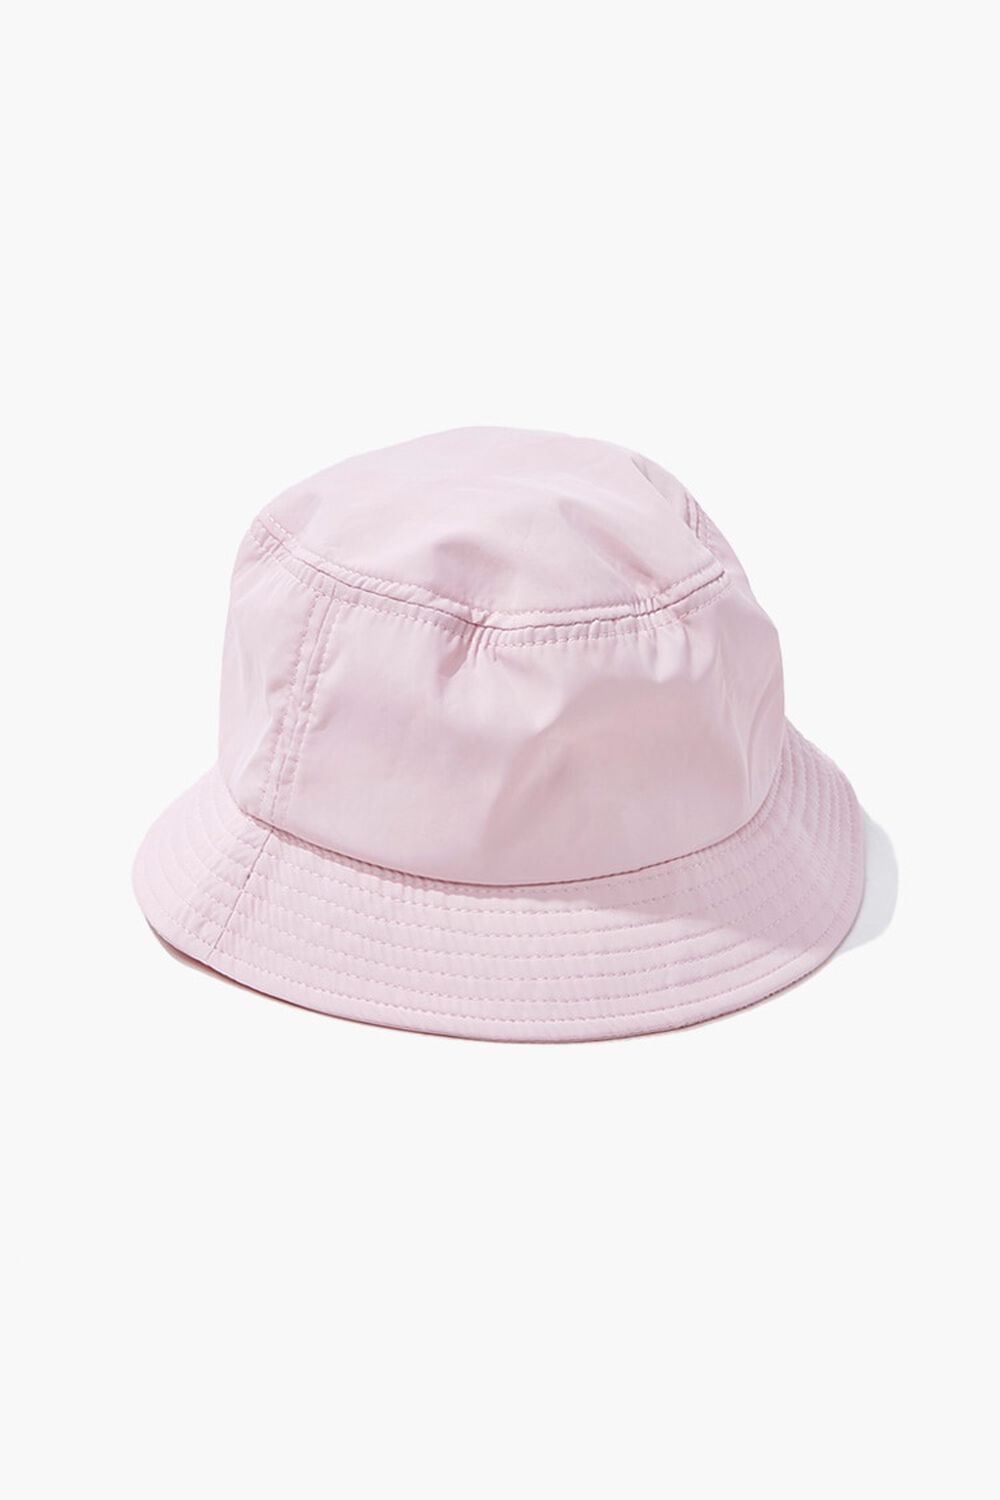 PINK Channel-Stitched Bucket Hat, image 1